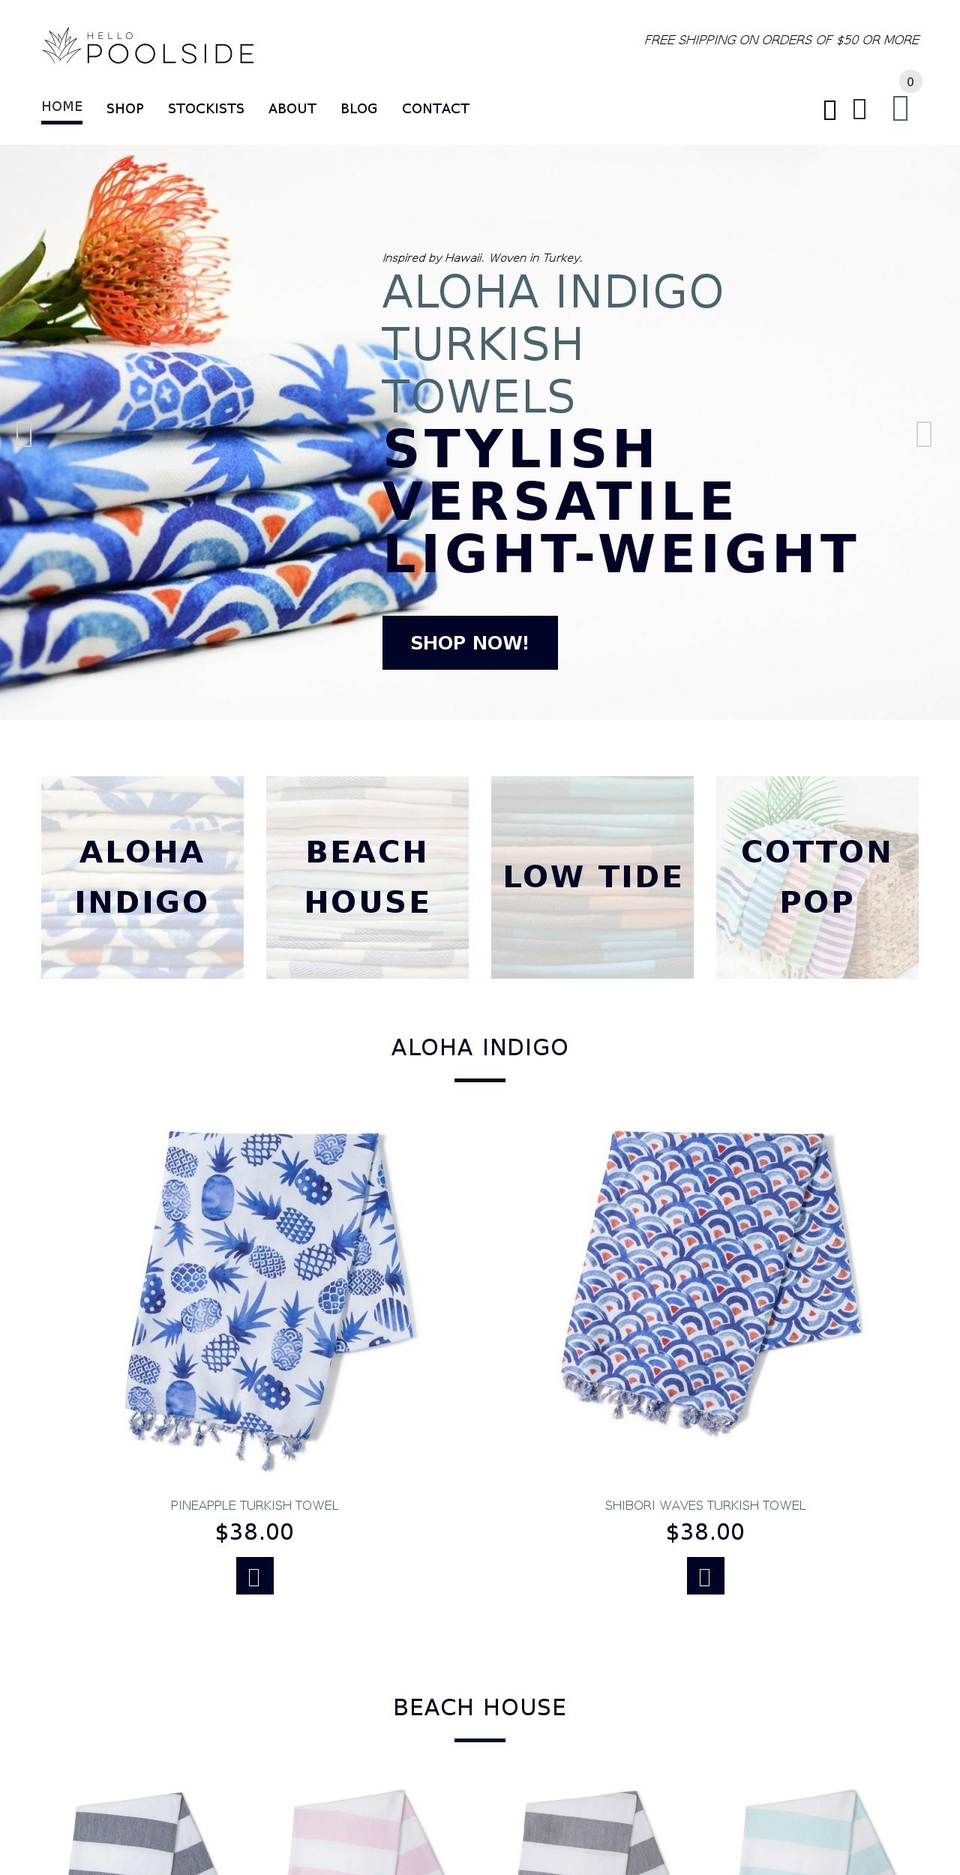 yourstore-v2-1-3 Shopify theme site example hellopoolside.com